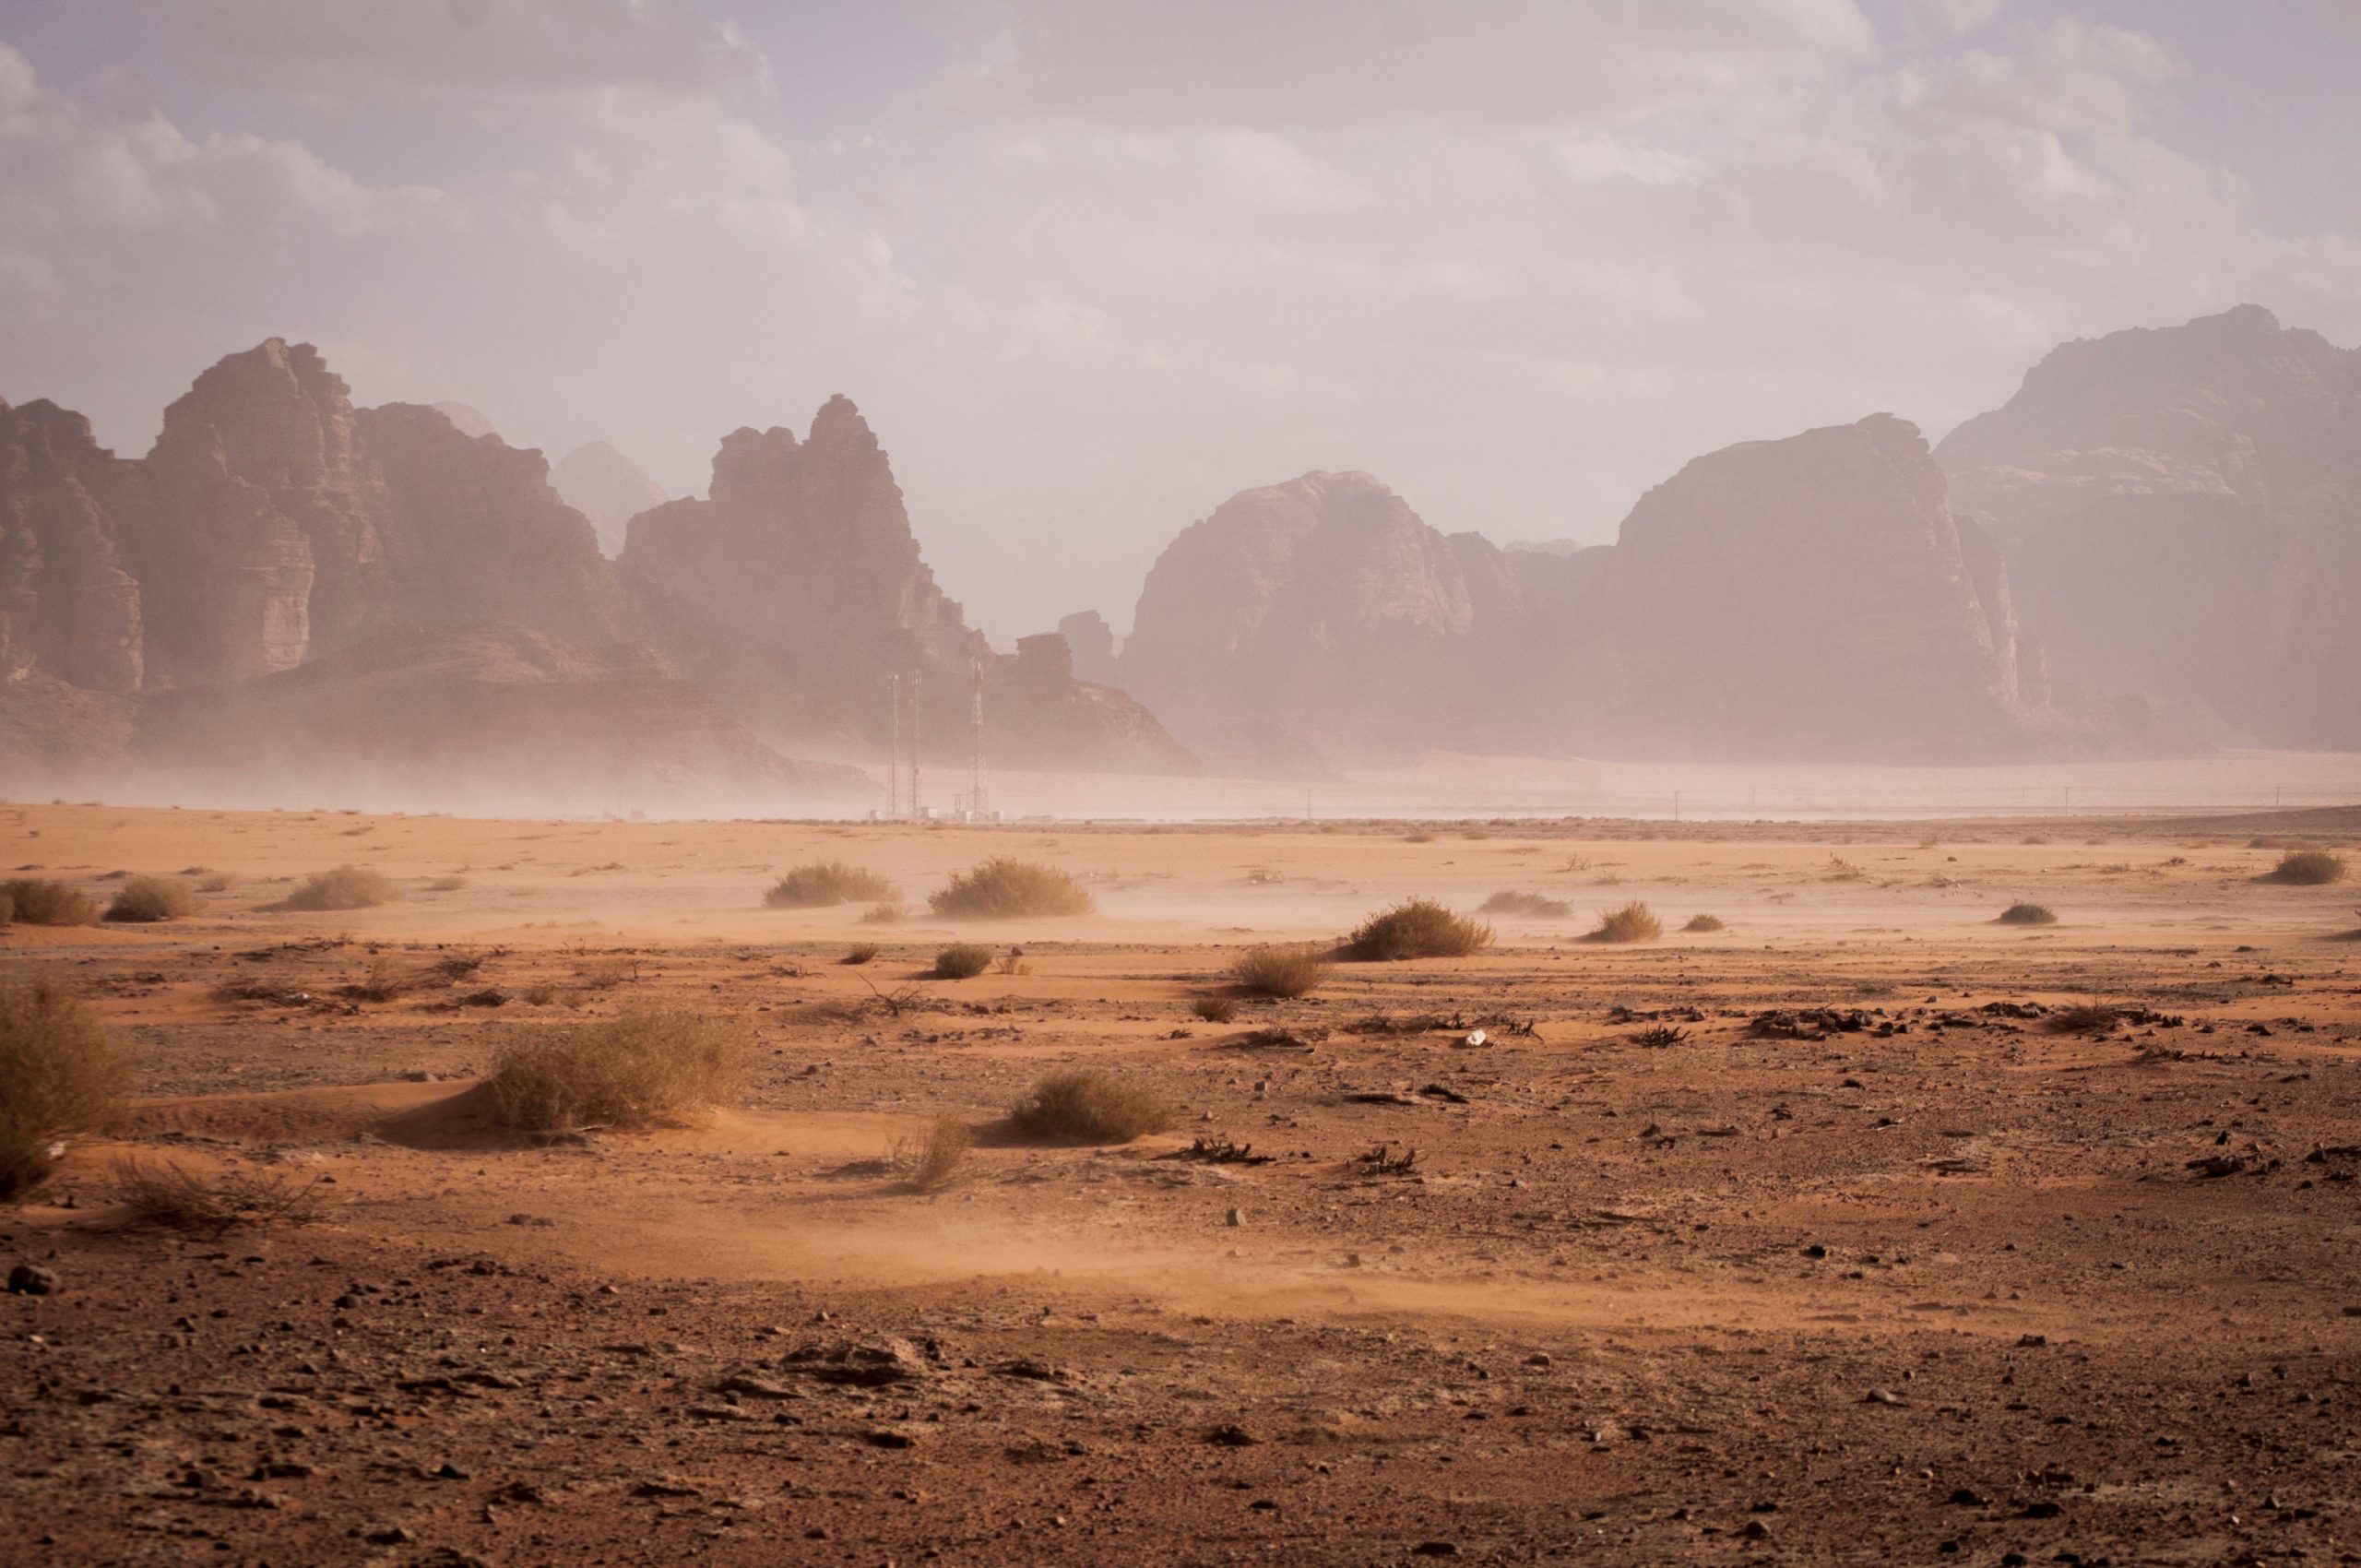 A desert scene with mountains in the background